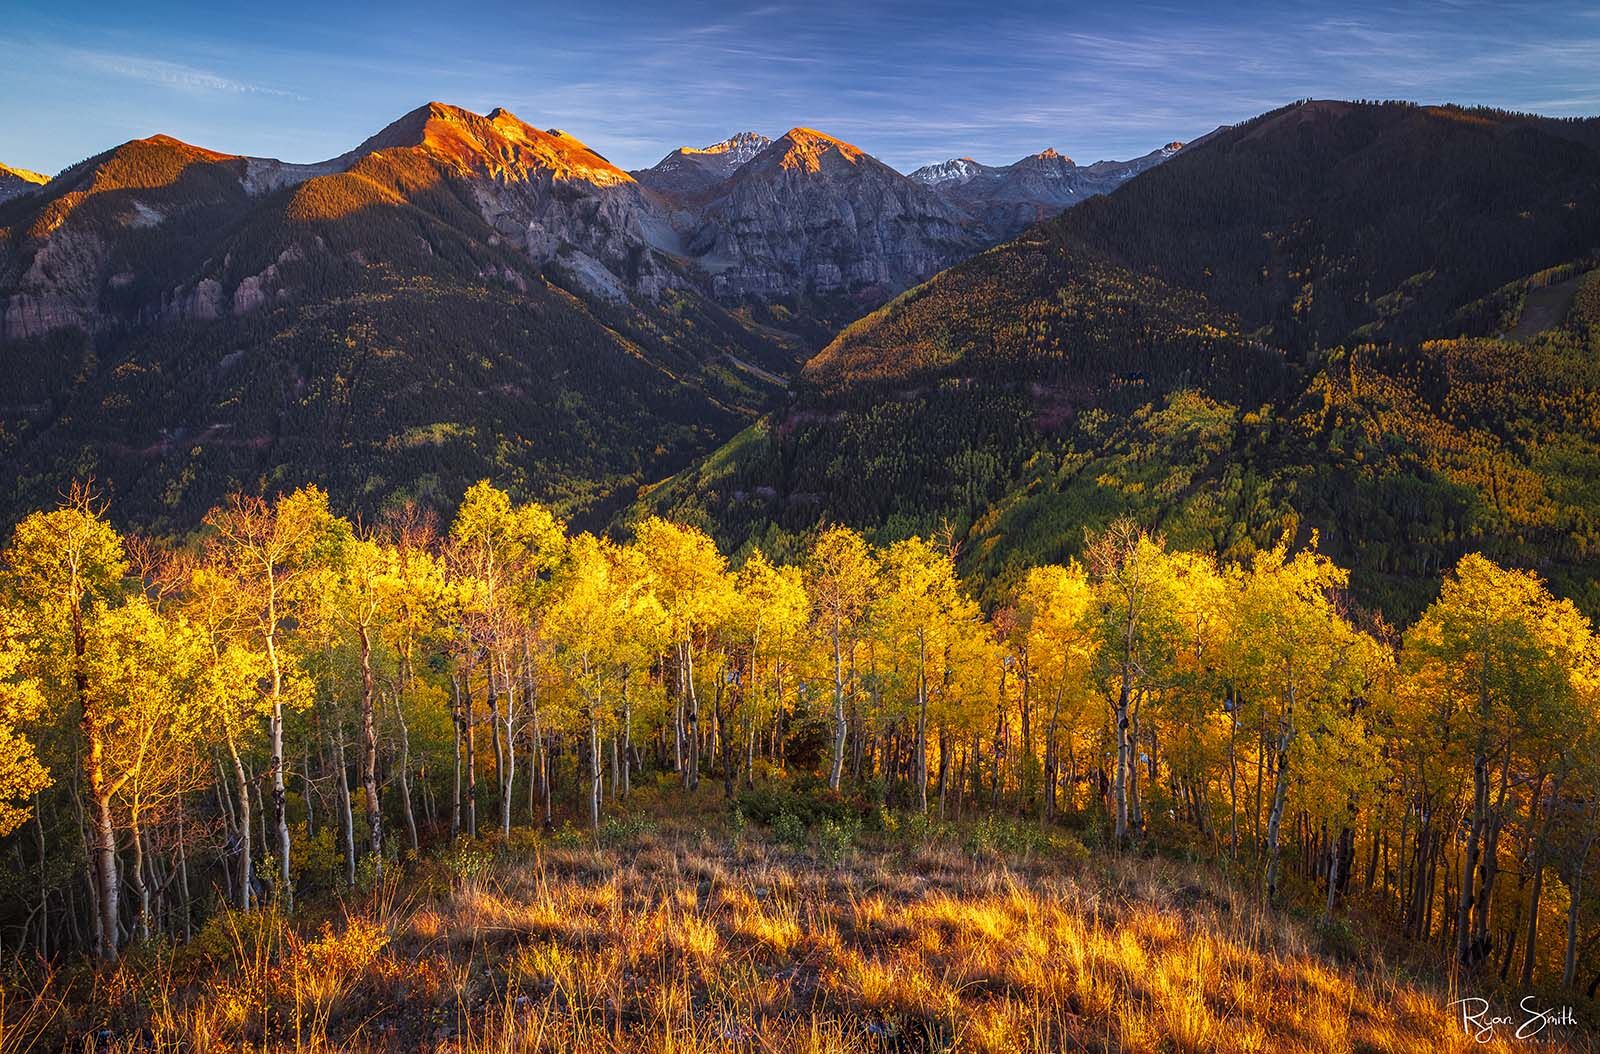 A line of yellow aspen trees at the top of a hill that stands in front of a mountain range in the distance likens a crown as the sun sets on the mountain tops.